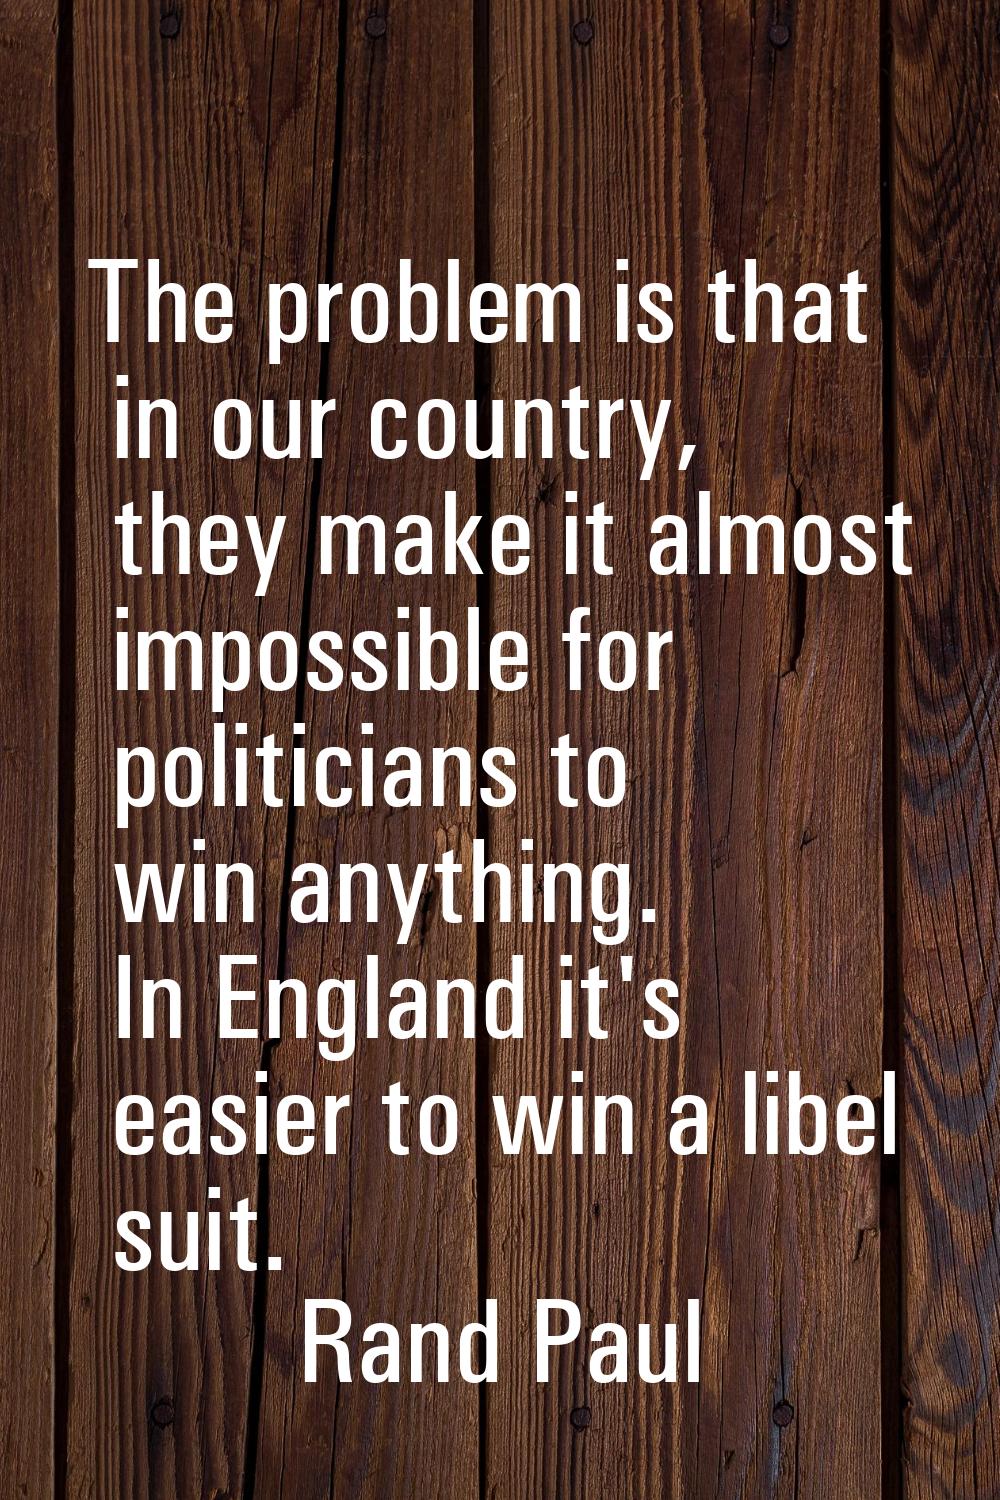 The problem is that in our country, they make it almost impossible for politicians to win anything.